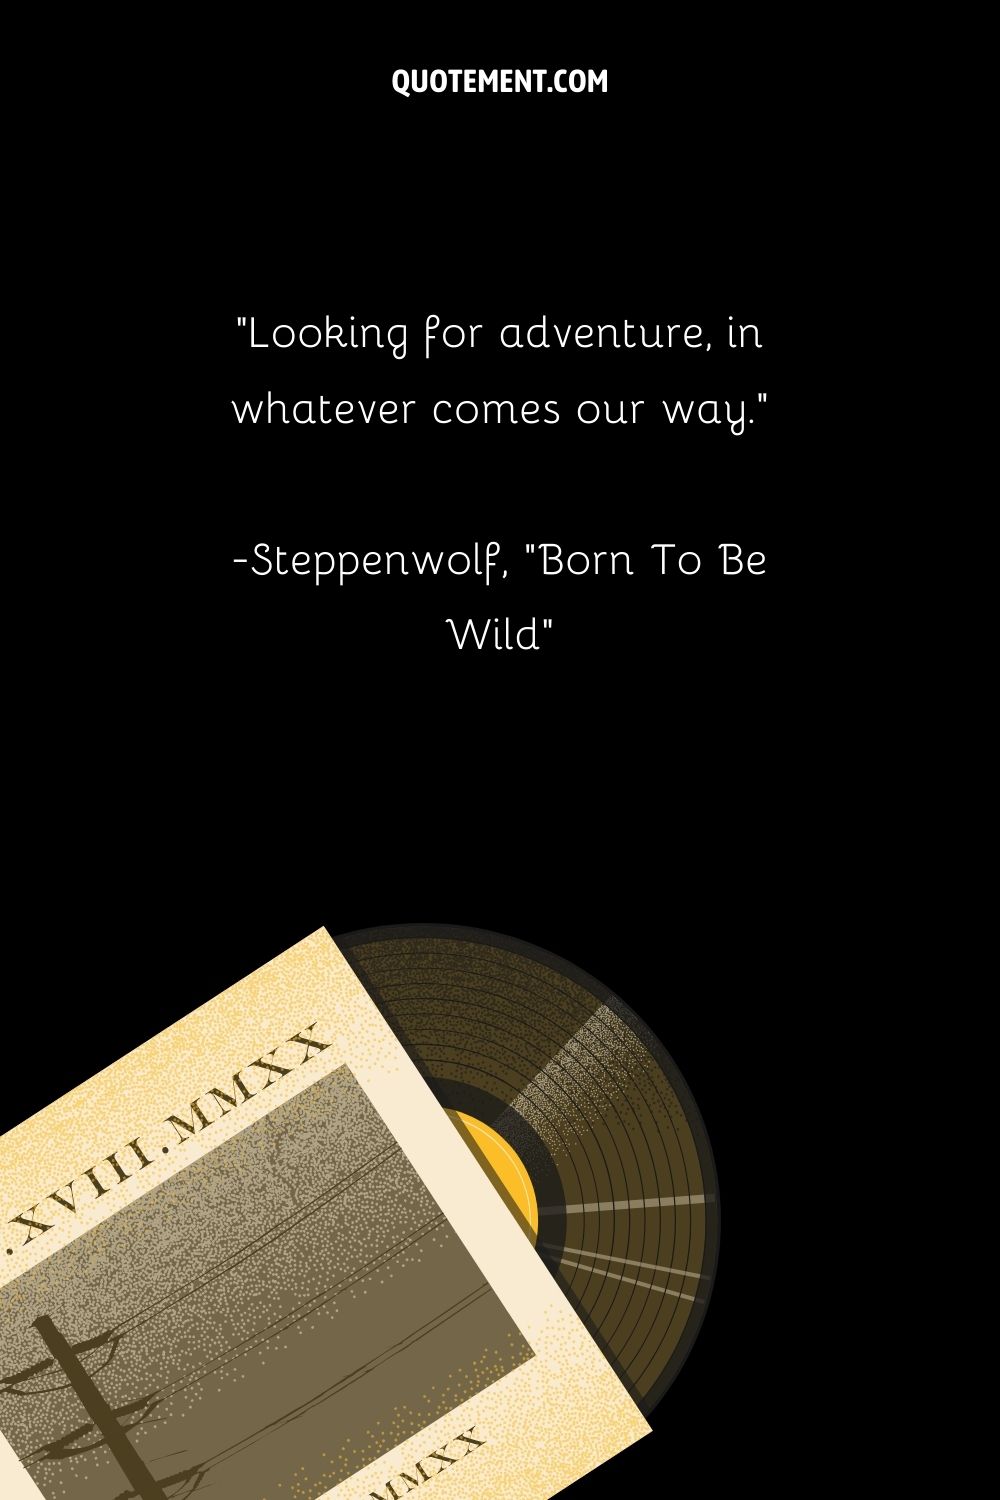 “Looking for adventure, in whatever comes our way.” — Steppenwolf, “Born To Be Wild”